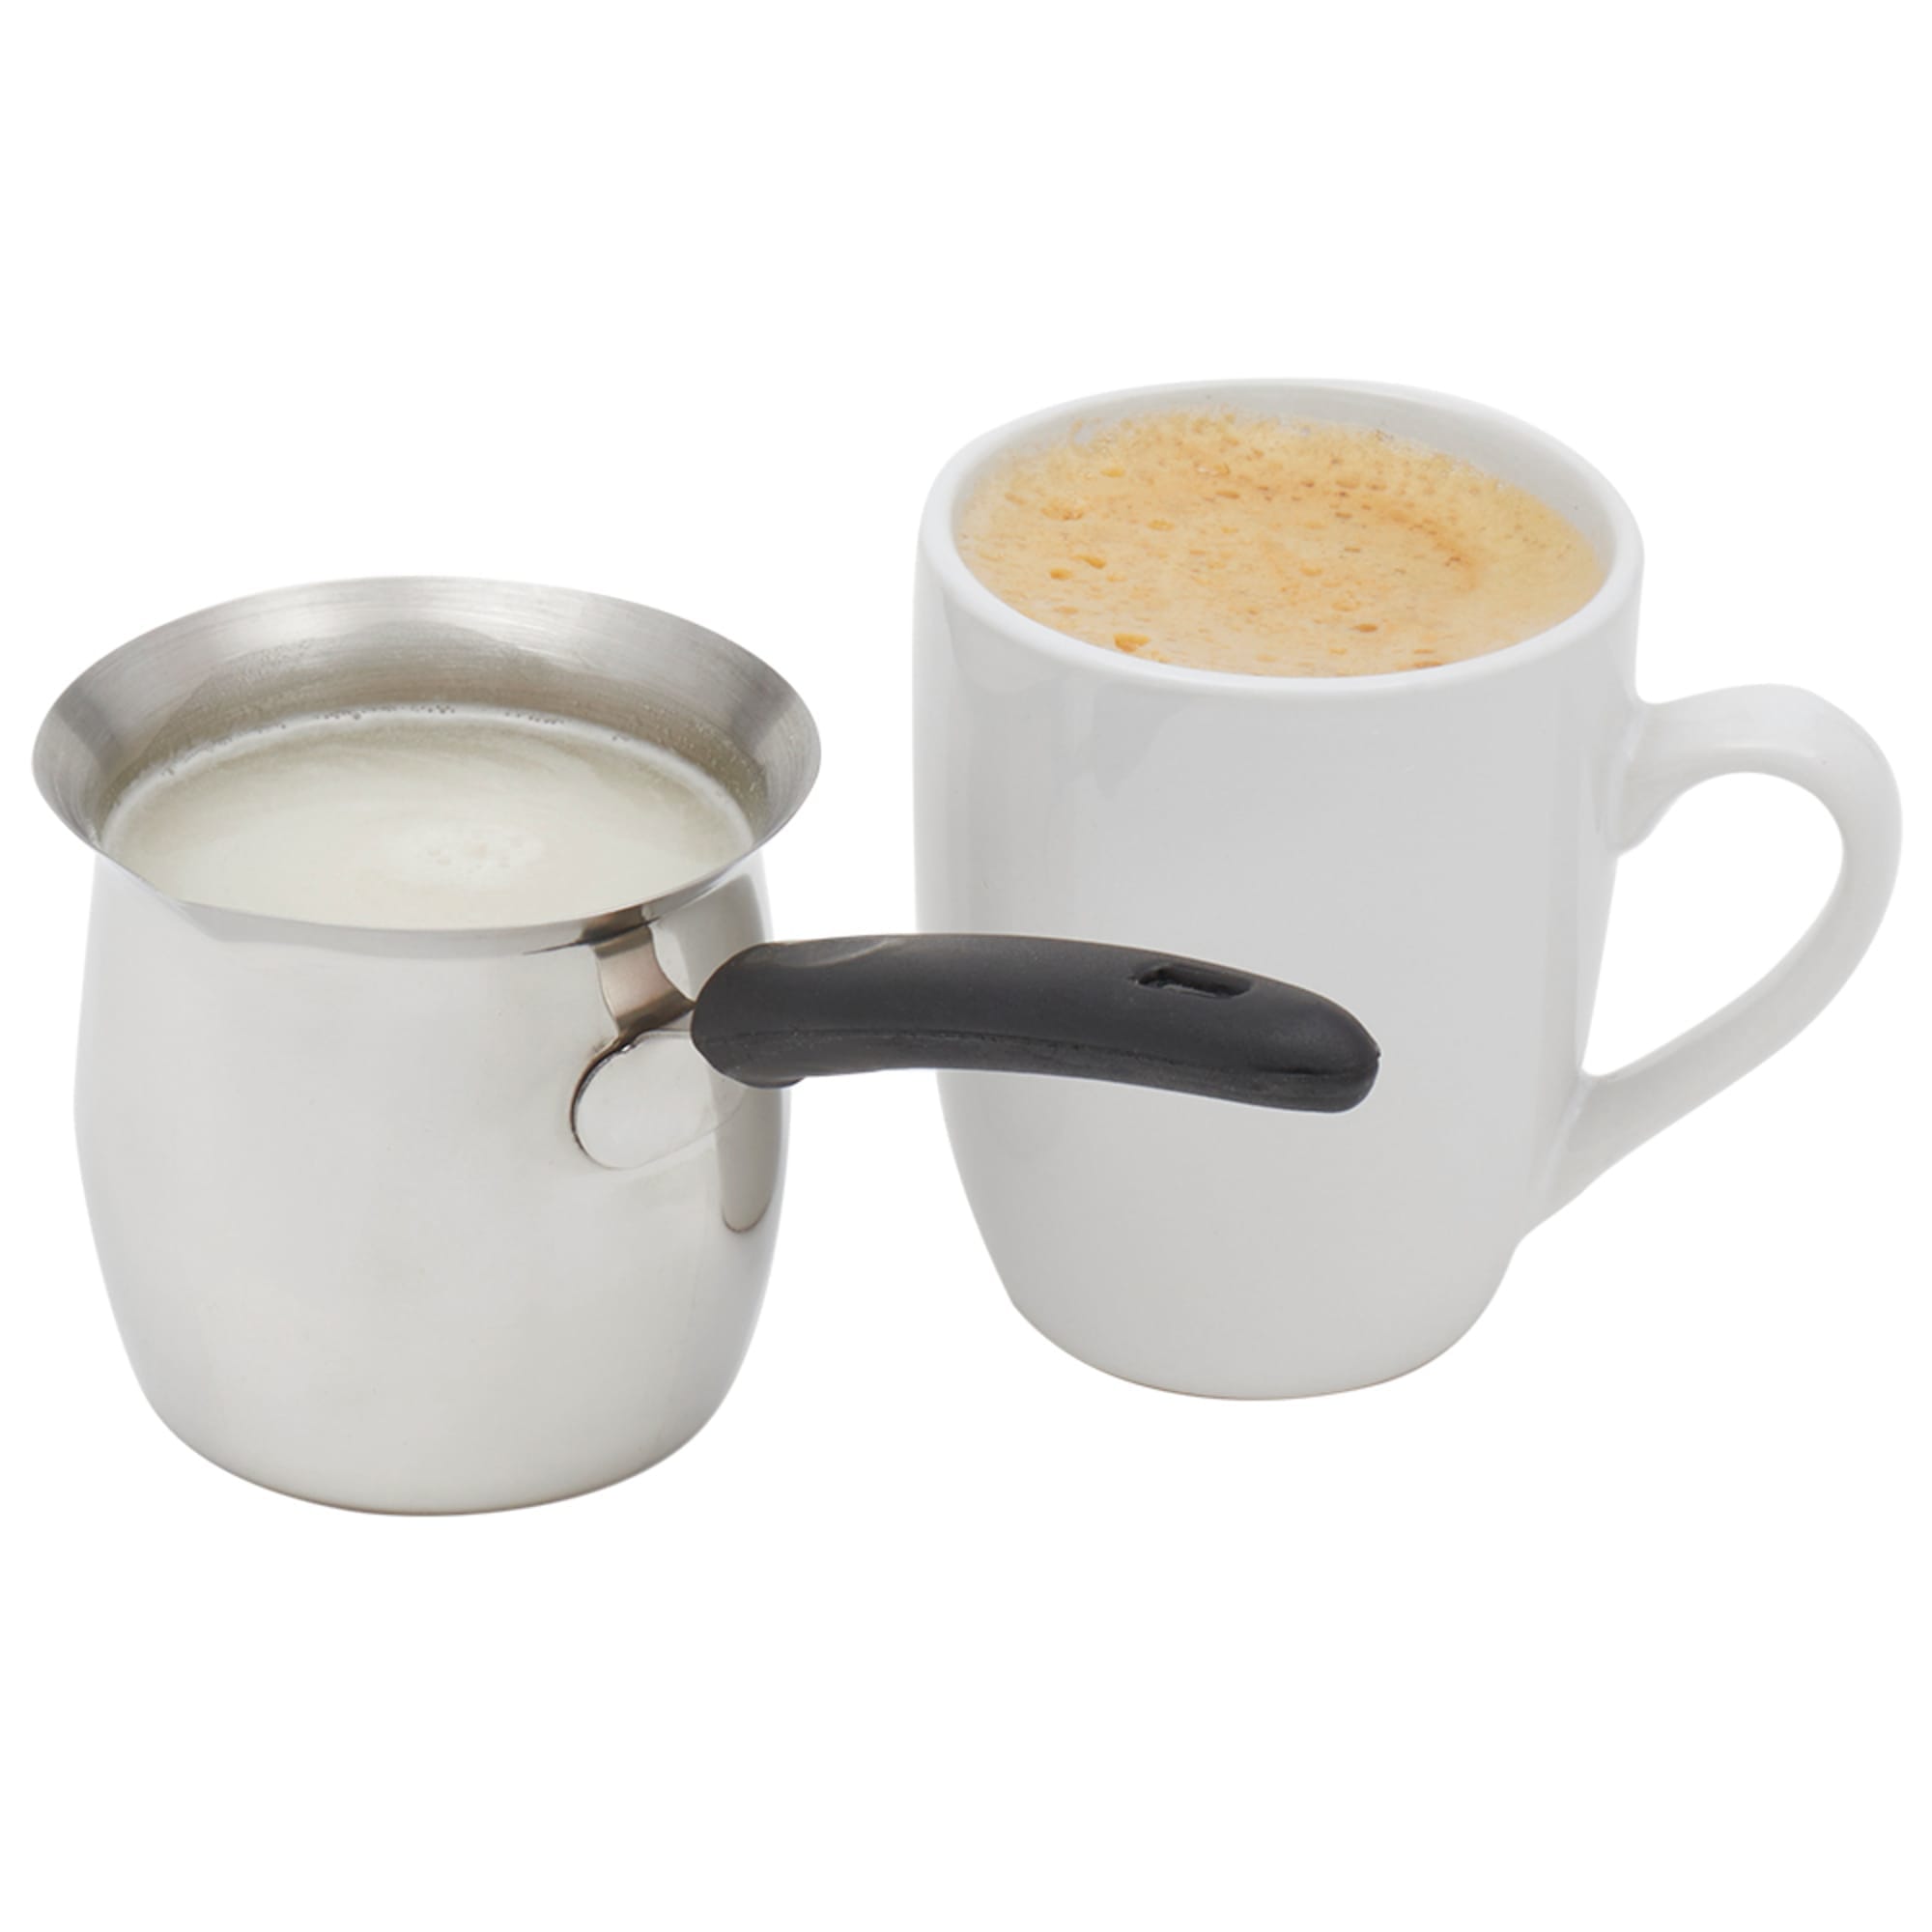 Home Basics 10 oz. Stainless Steel Mini Butter Melting Pot with Pour Spout $3.00 EACH, CASE PACK OF 24